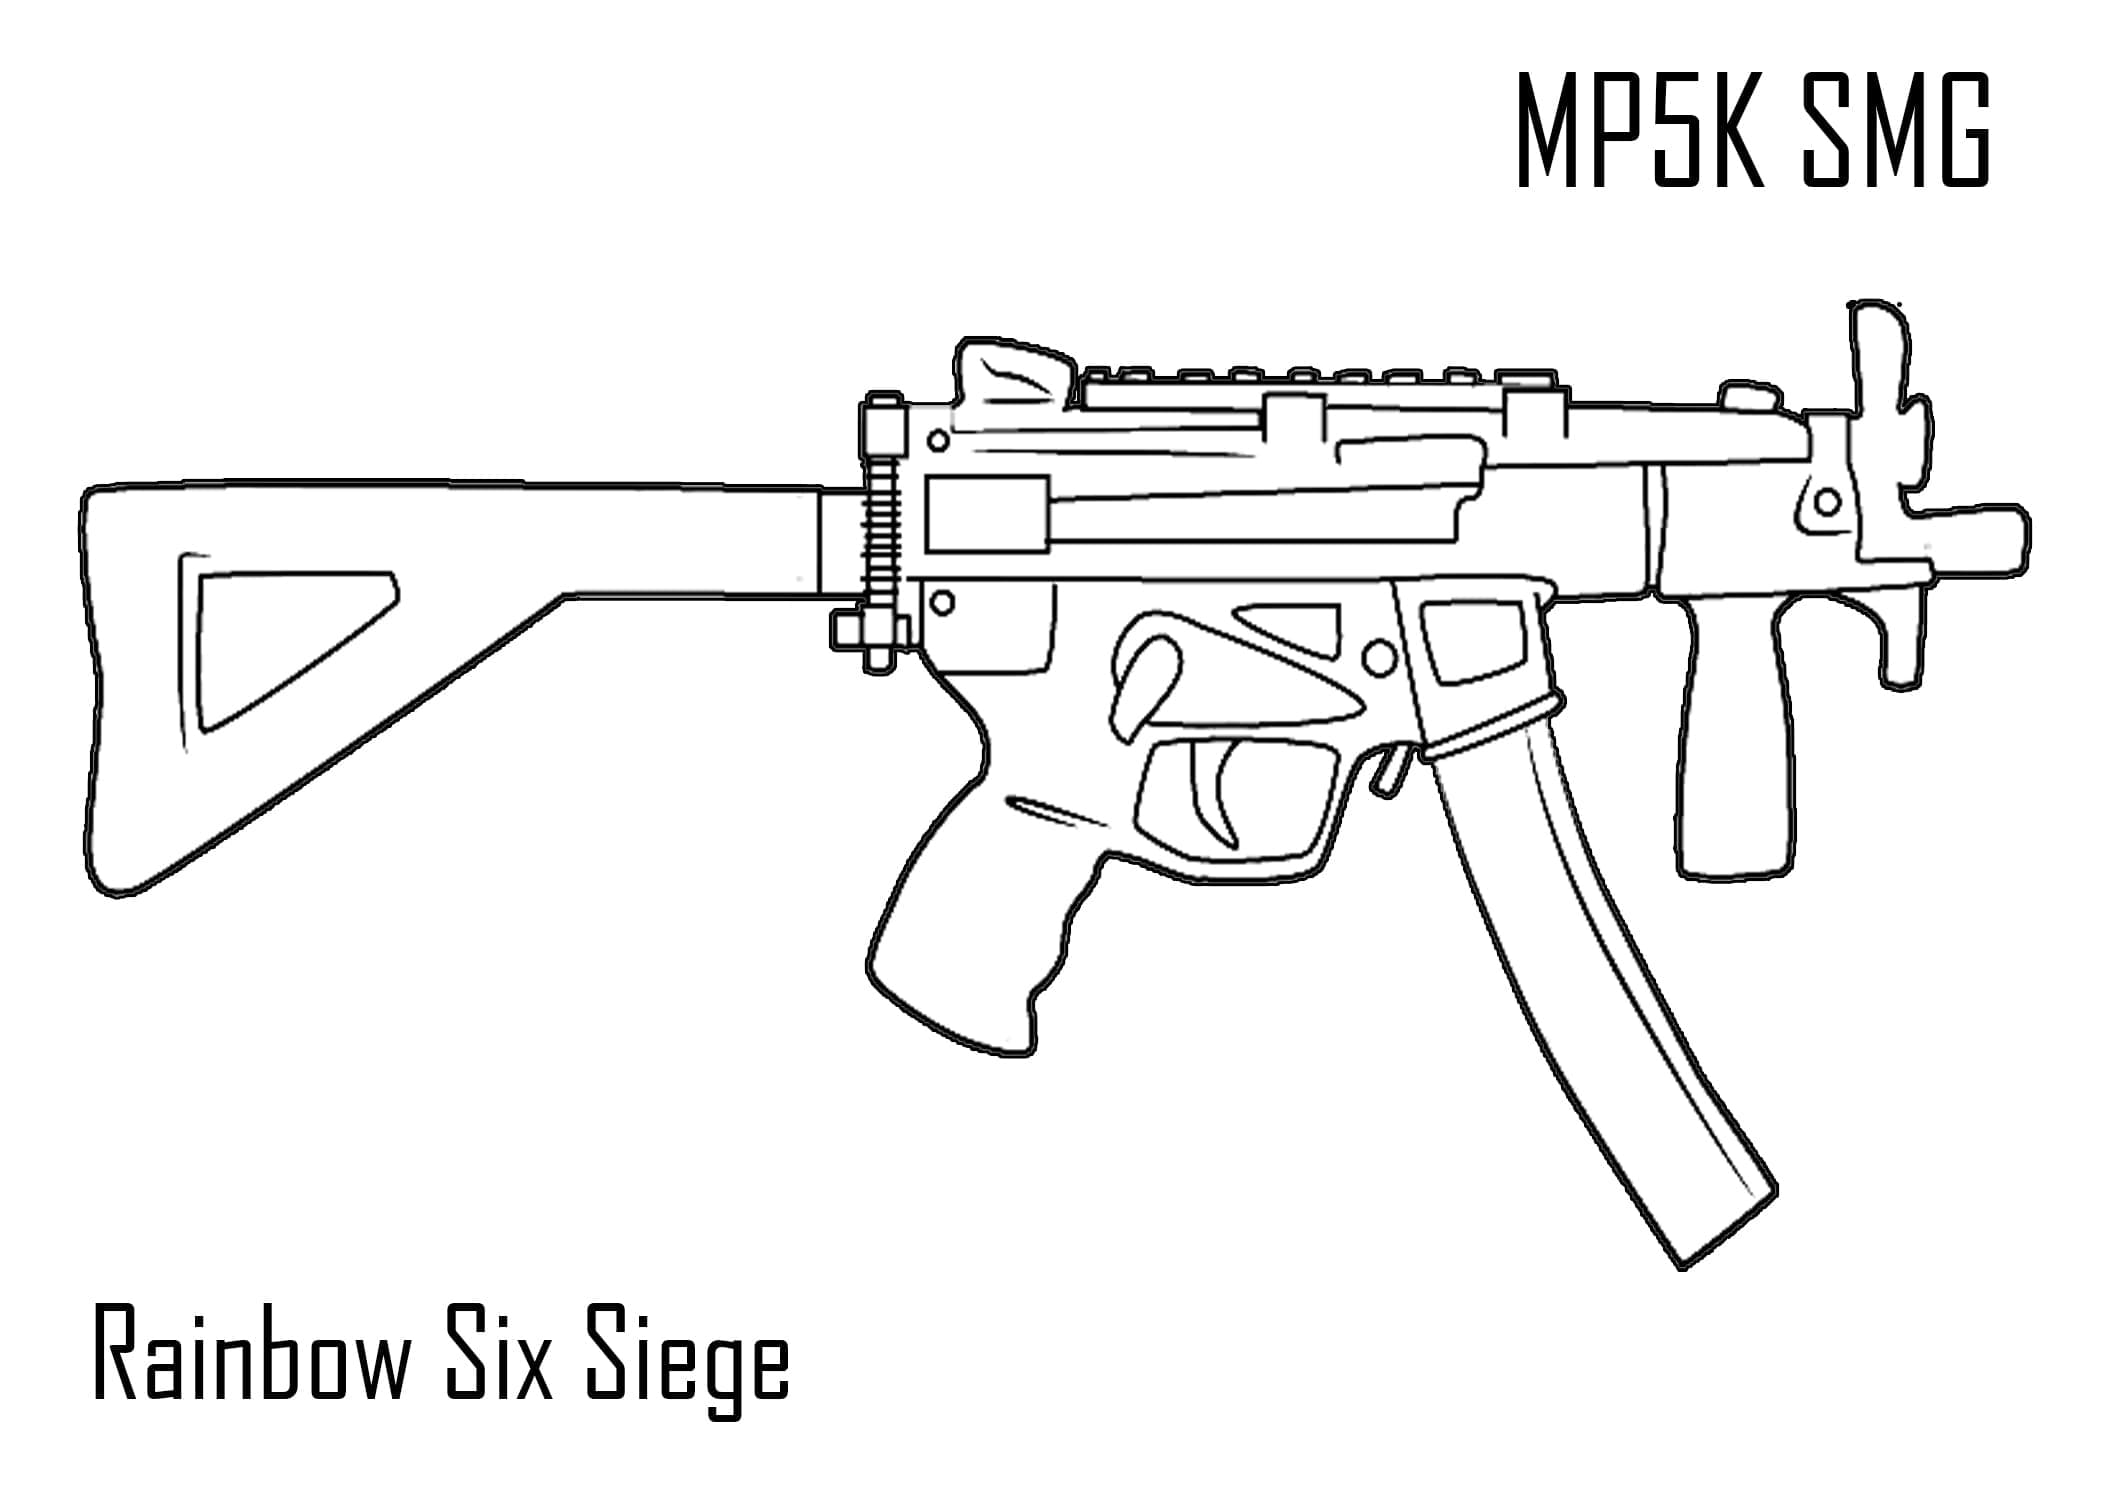 MP5K SMG Gun coloring page - Download, Print or Color Online for Free